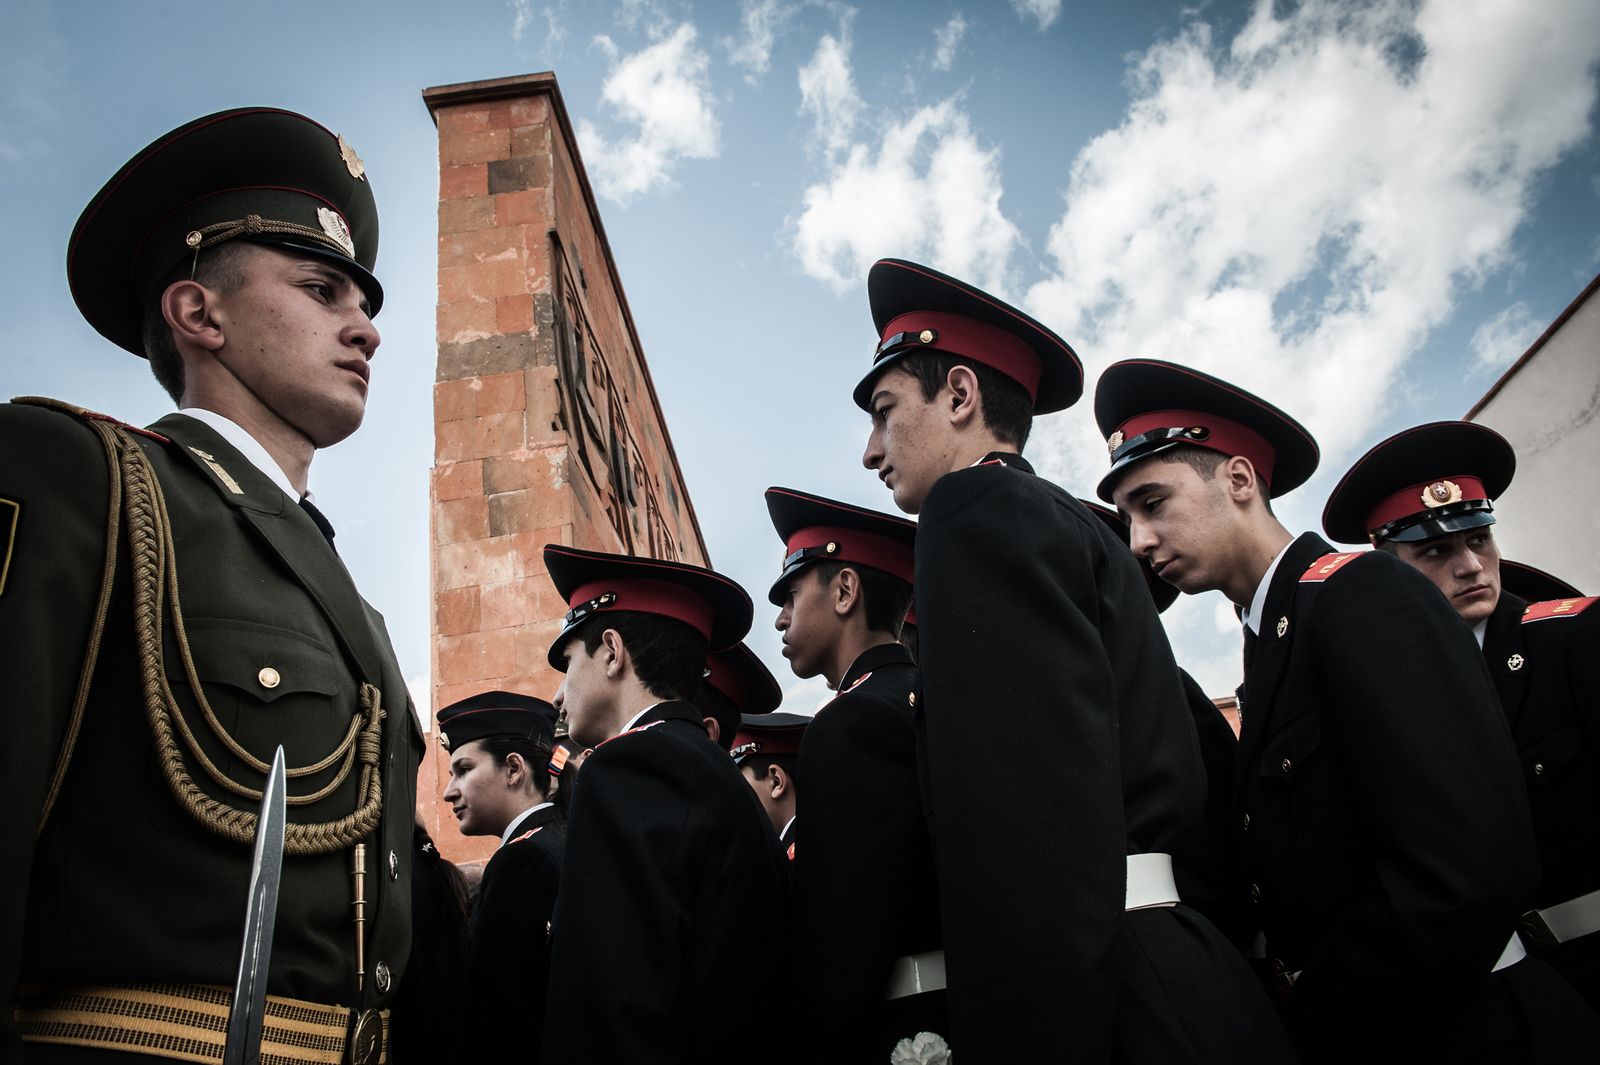 © Mattia Vacca - Young soldiers observe the Armenian Genocide Remembrance Day.